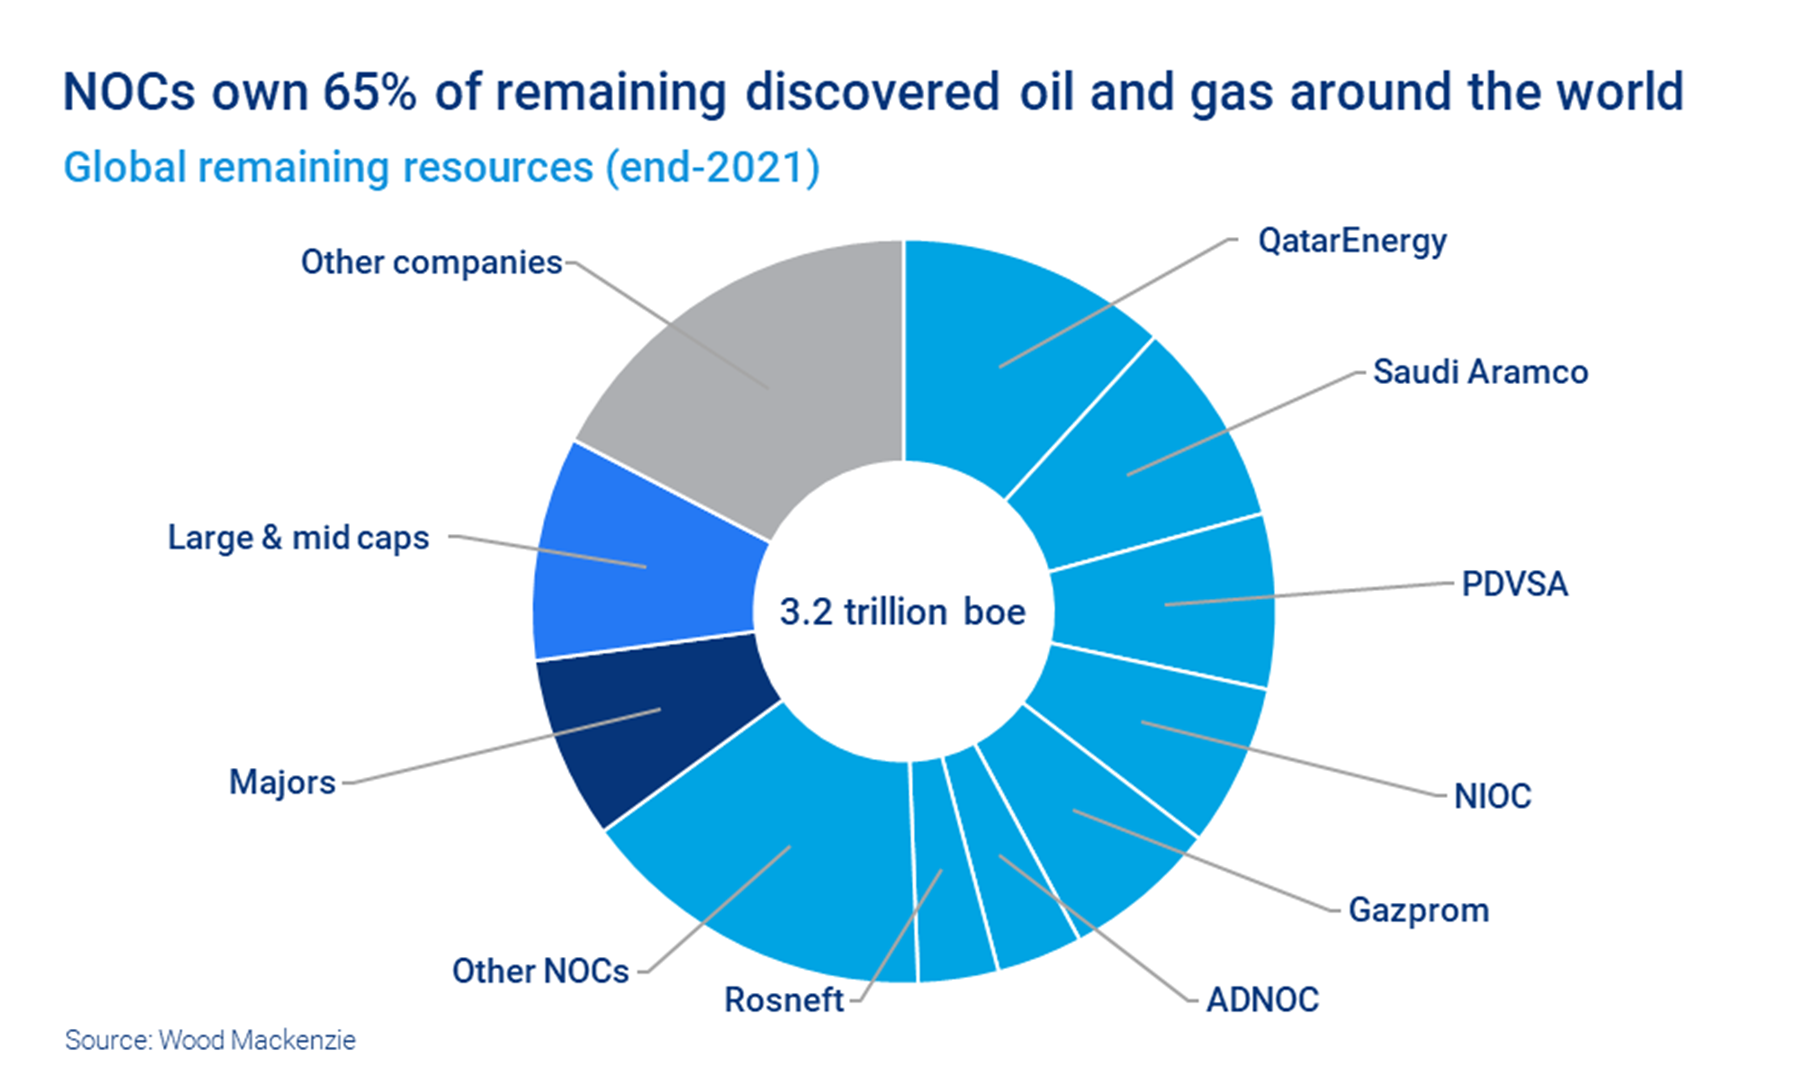 Chart shows NOCs own 65% of remaining discovered oil and gas around the world